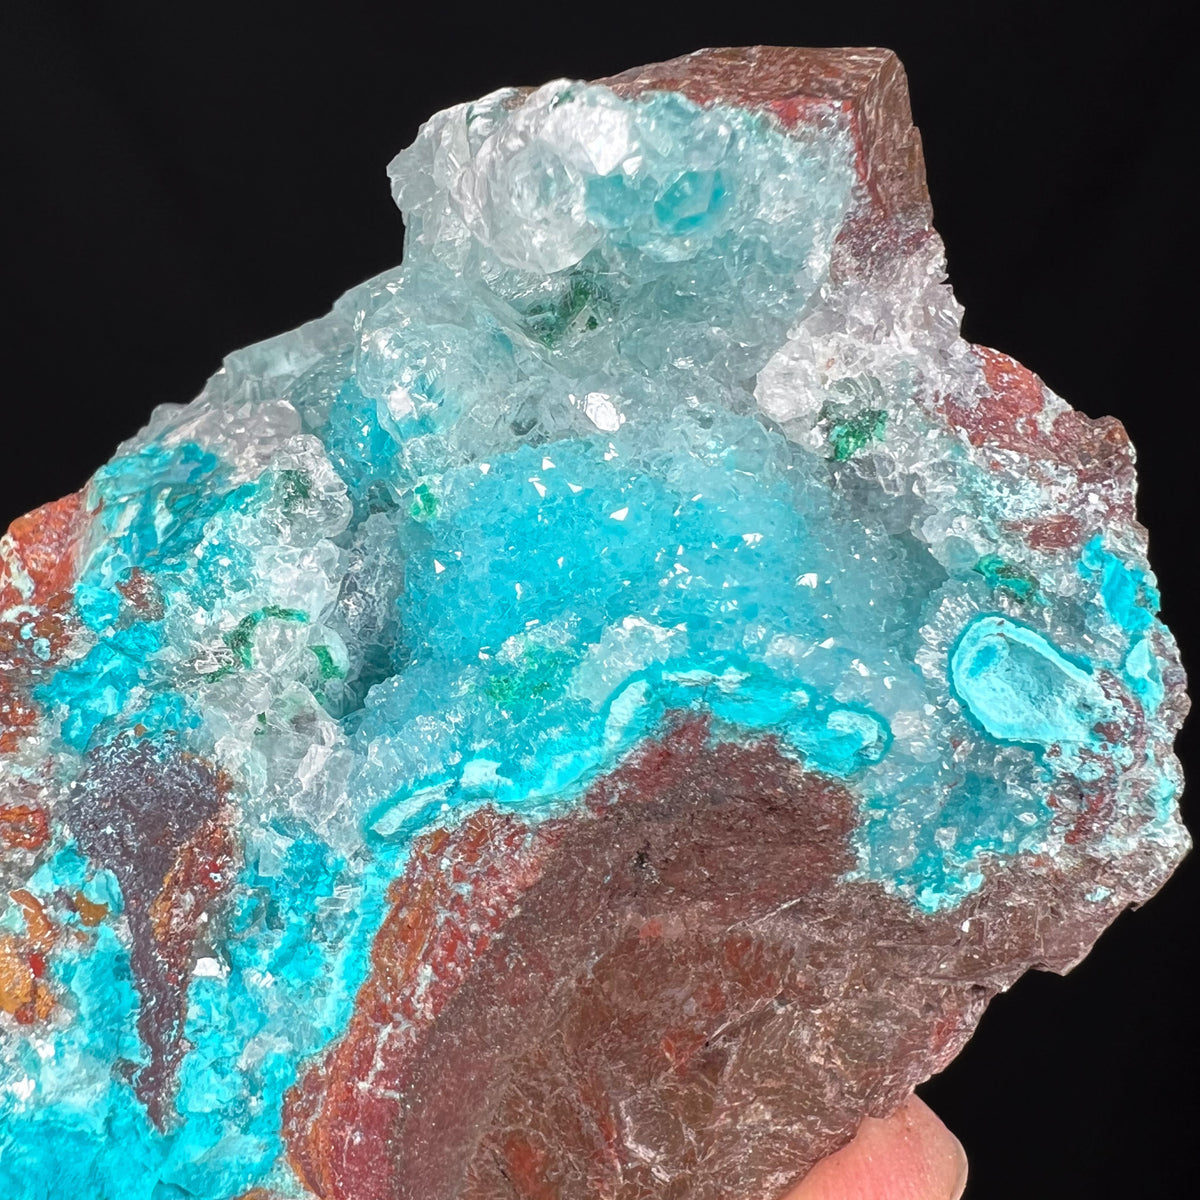 Quartz crystal coating Chrysocolla and Atacamite from the Lily Mine, Peru